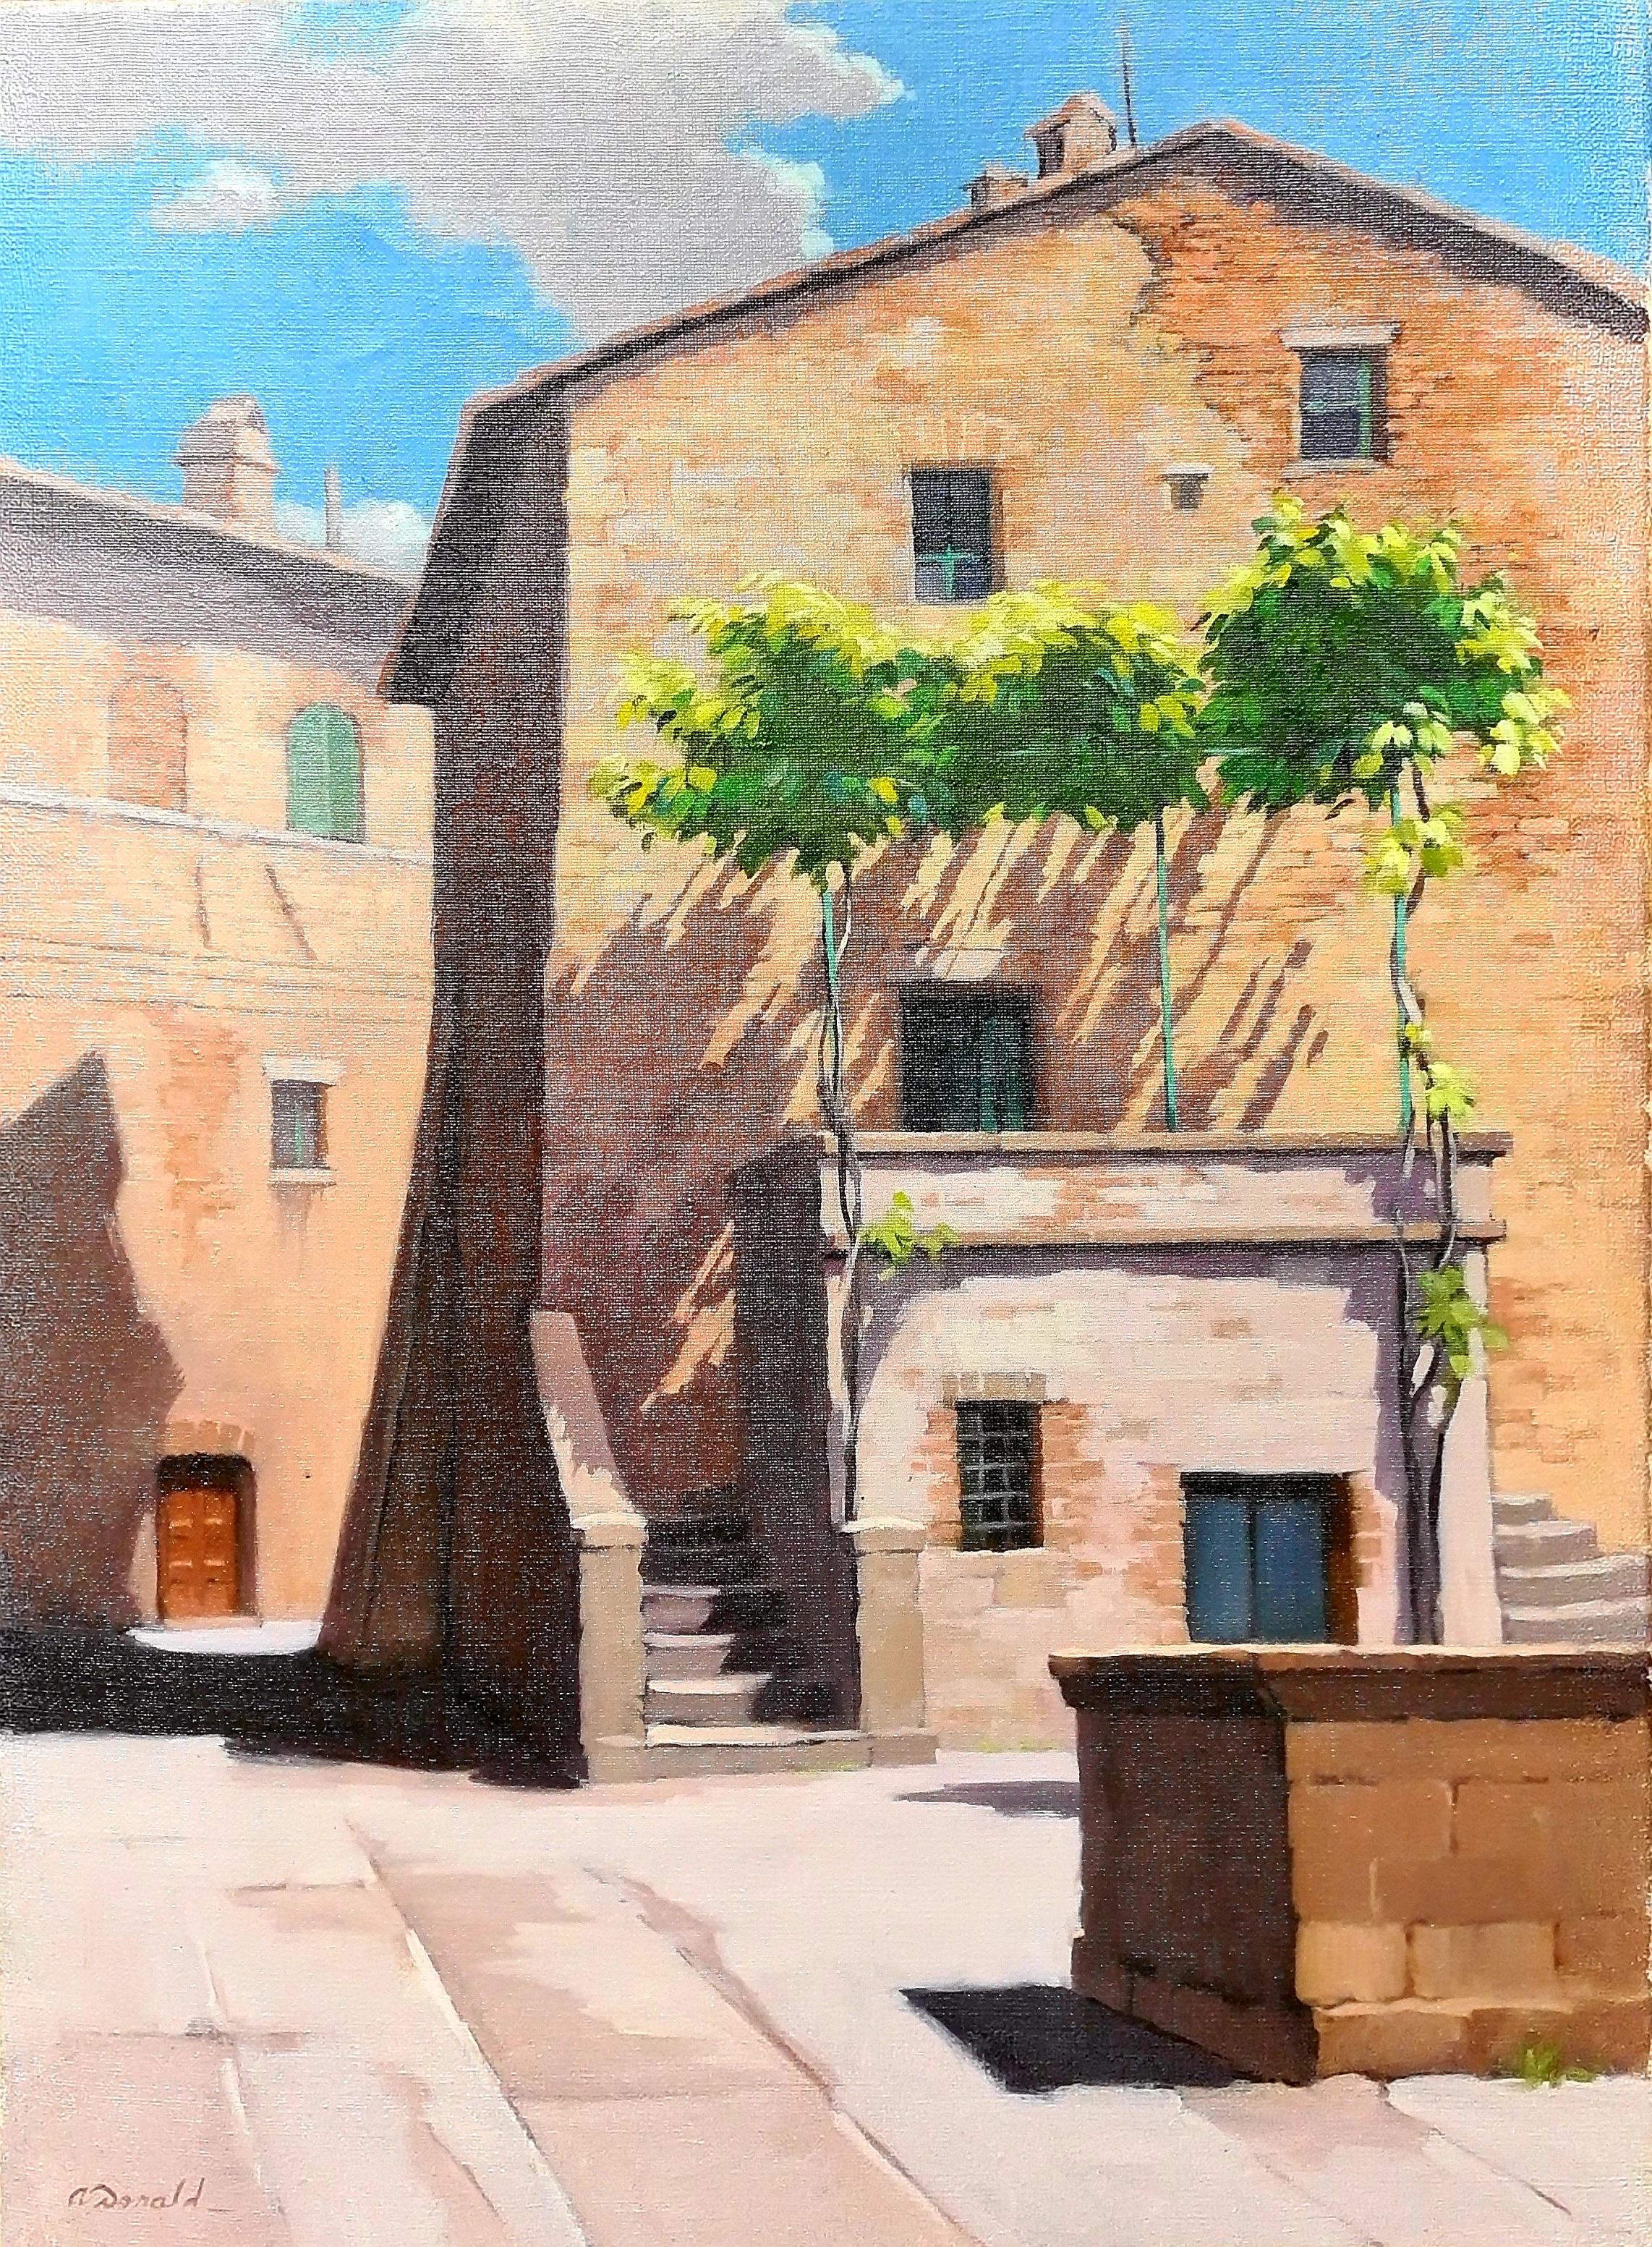 The Square, Monticchiello, Tuscany, Italy, Large Scale Oil on Canvas.